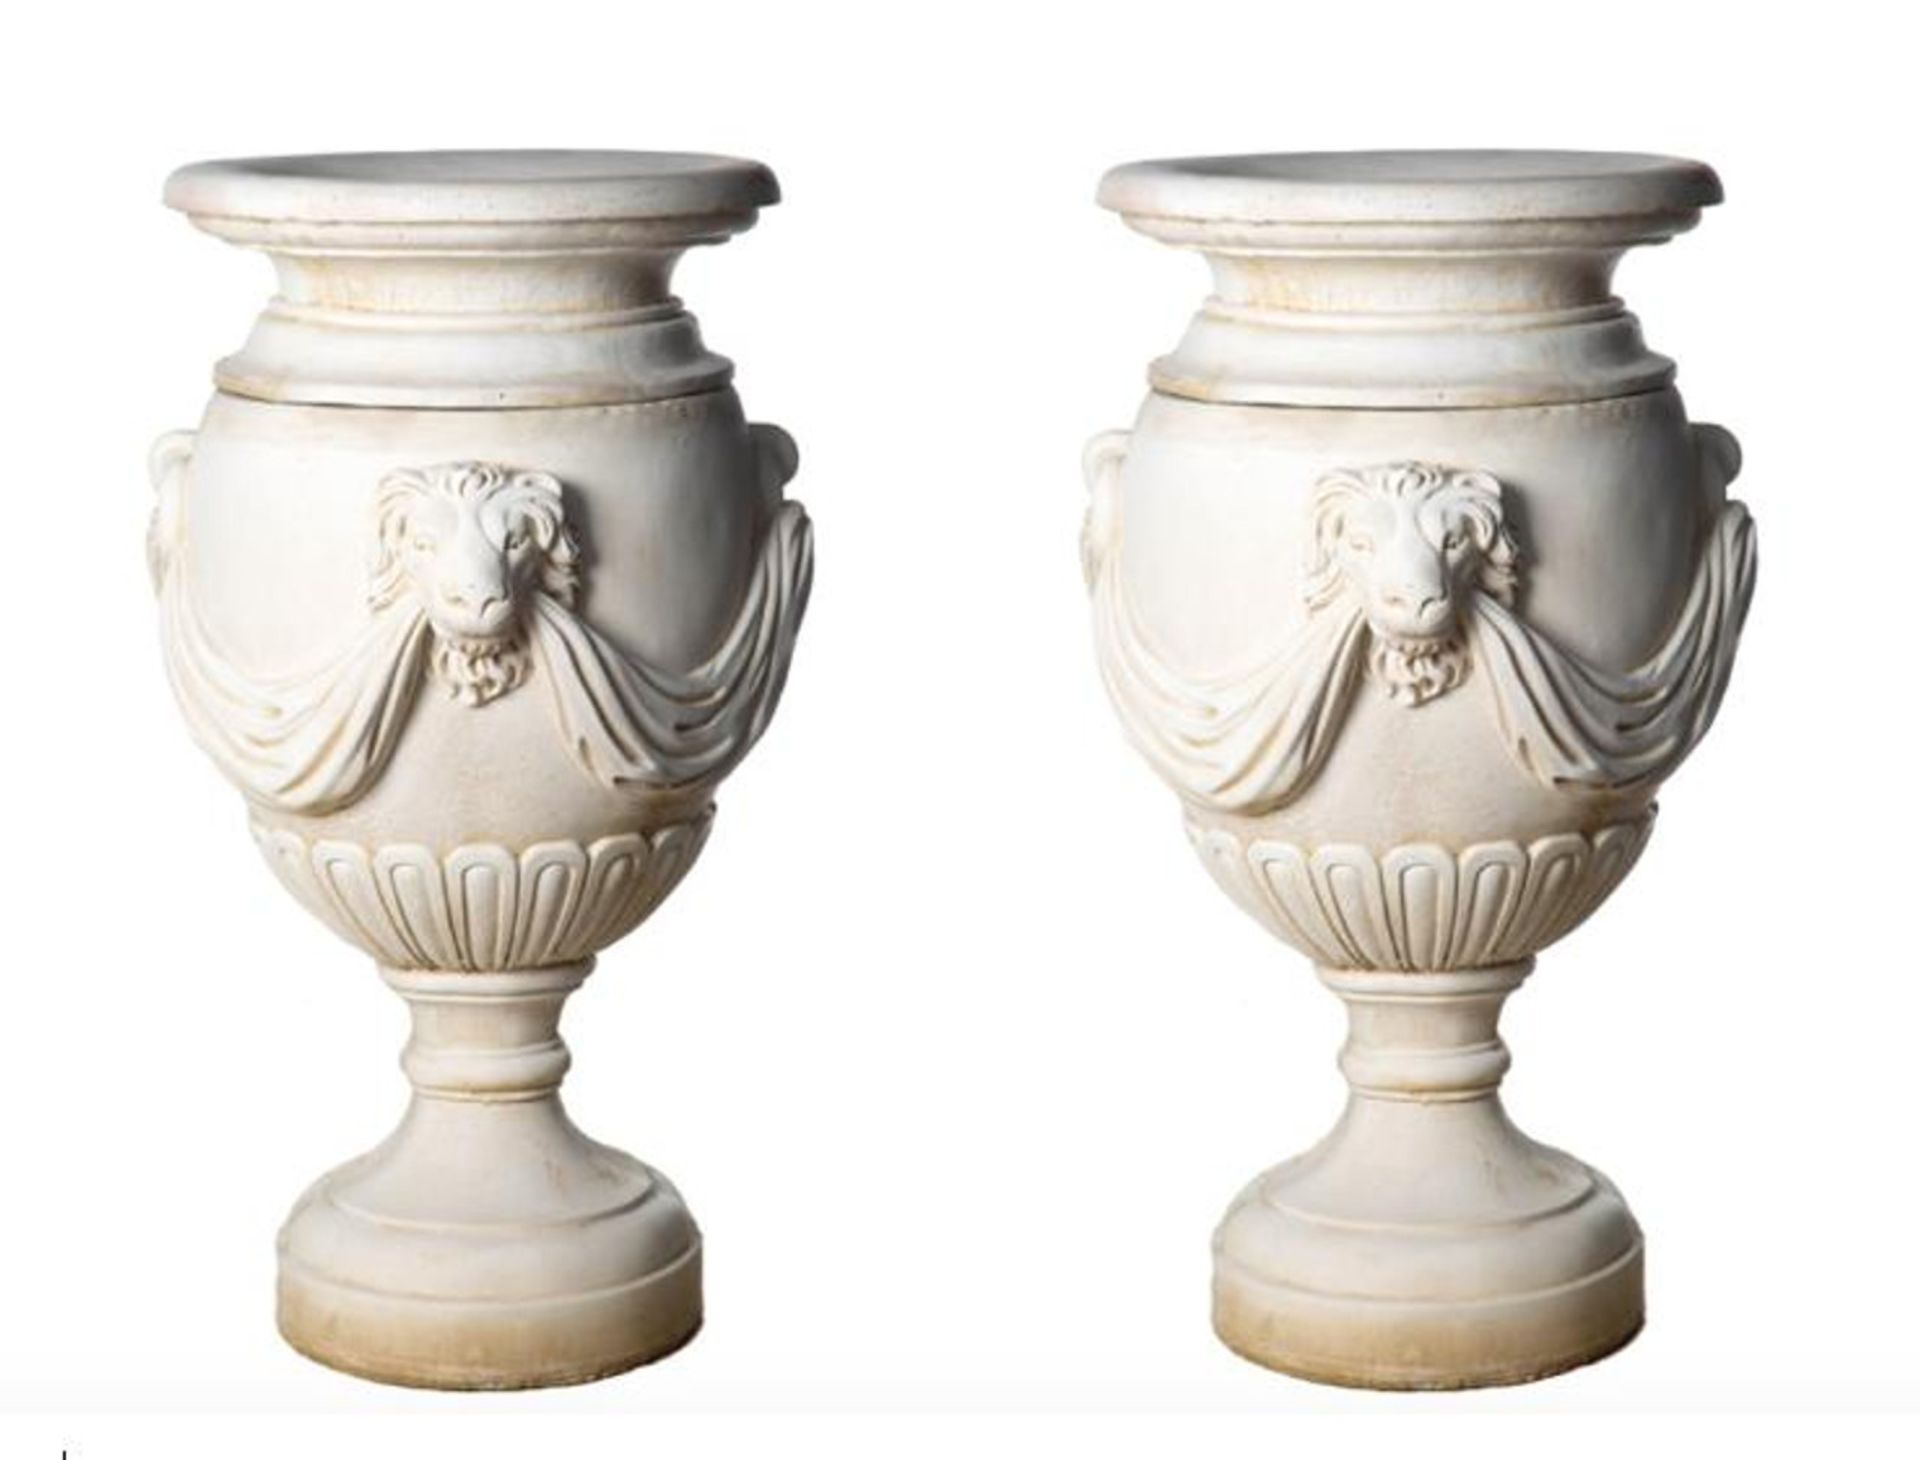 A Pair Of Extremely Large Draped Lion Head Garden Urns Extremely Large Antique Style Pot With Swag